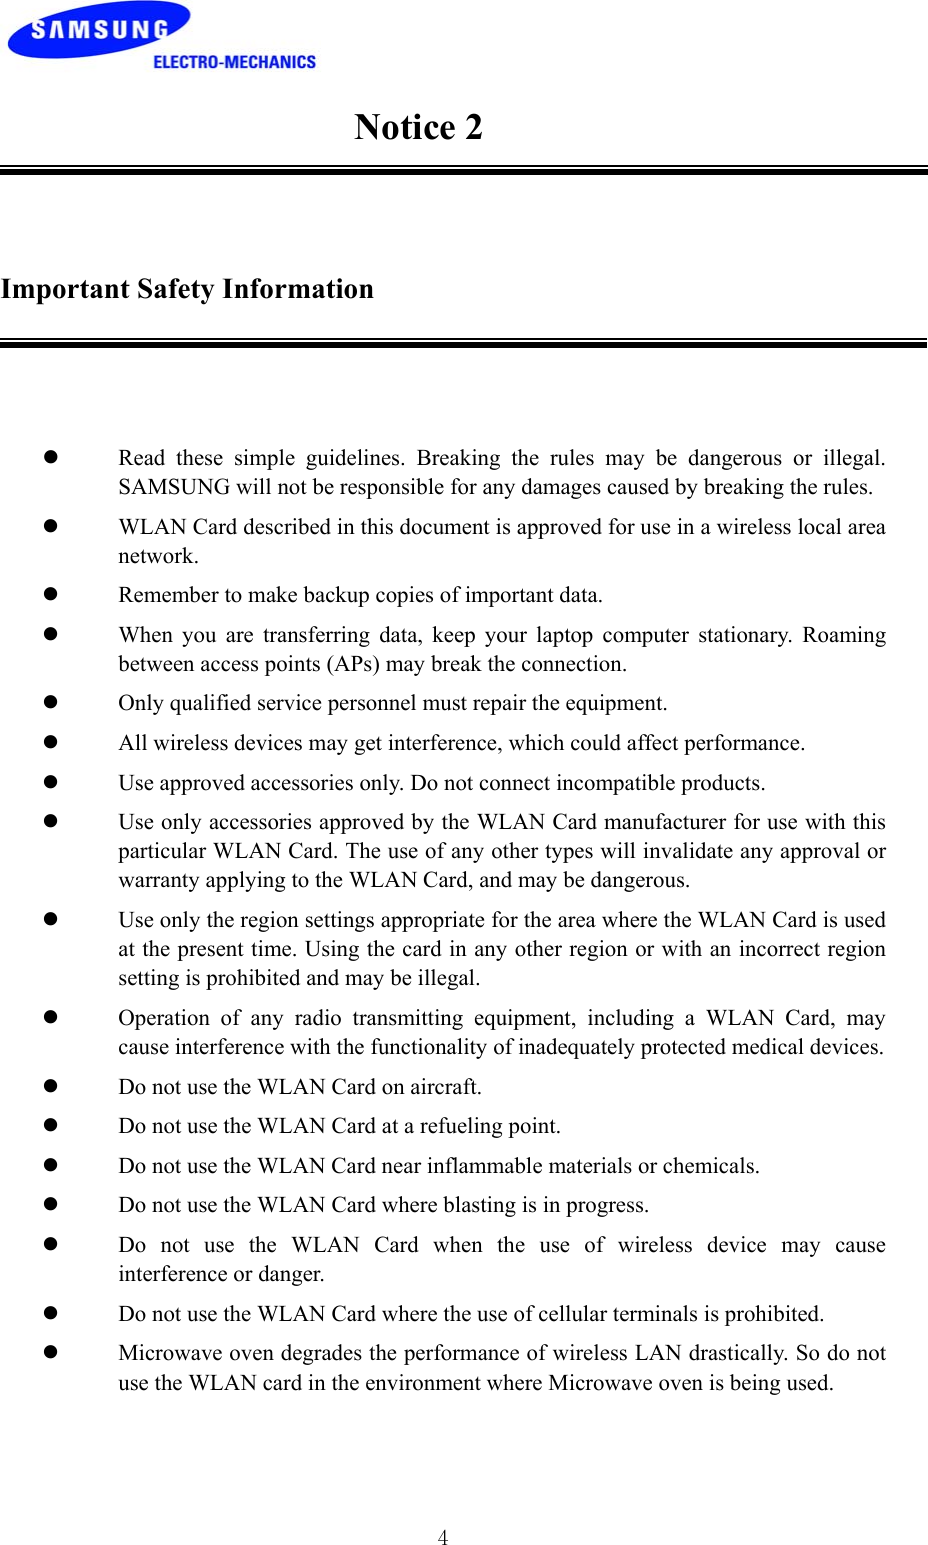 4Notice 2Important Safety Informationz Read these simple guidelines. Breaking the rules may be dangerous or illegal.SAMSUNG will not be responsible for any damages caused by breaking the rules.z WLAN Card described in this document is approved for use in a wireless local areanetwork.z Remember to make backup copies of important data.z When you are transferring data, keep your laptop computer stationary. Roamingbetween access points (APs) may break the connection.z Only qualified service personnel must repair the equipment.z All wireless devices may get interference, which could affect performance.z Use approved accessories only. Do not connect incompatible products.z Use only accessories approved by the WLAN Card manufacturer for use with thisparticular WLAN Card. The use of any other types will invalidate any approval orwarranty applying to the WLAN Card, and may be dangerous.z Use only the region settings appropriate for the area where the WLAN Card is usedat the present time. Using the card in any other region or with an incorrect regionsetting is prohibited and may be illegal.z Operation of any radio transmitting equipment, including a WLAN Card, maycause interference with the functionality of inadequately protected medical devices.z Do not use the WLAN Card on aircraft.z Do not use the WLAN Card at a refueling point.z Do not use the WLAN Card near inflammable materials or chemicals.z Do not use the WLAN Card where blasting is in progress.z Do not use the WLAN Card when the use of wireless device may causeinterference or danger.z Do not use the WLAN Card where the use of cellular terminals is prohibited.z Microwave oven degrades the performance of wireless LAN drastically. So do notuse the WLAN card in the environment where Microwave oven is being used.